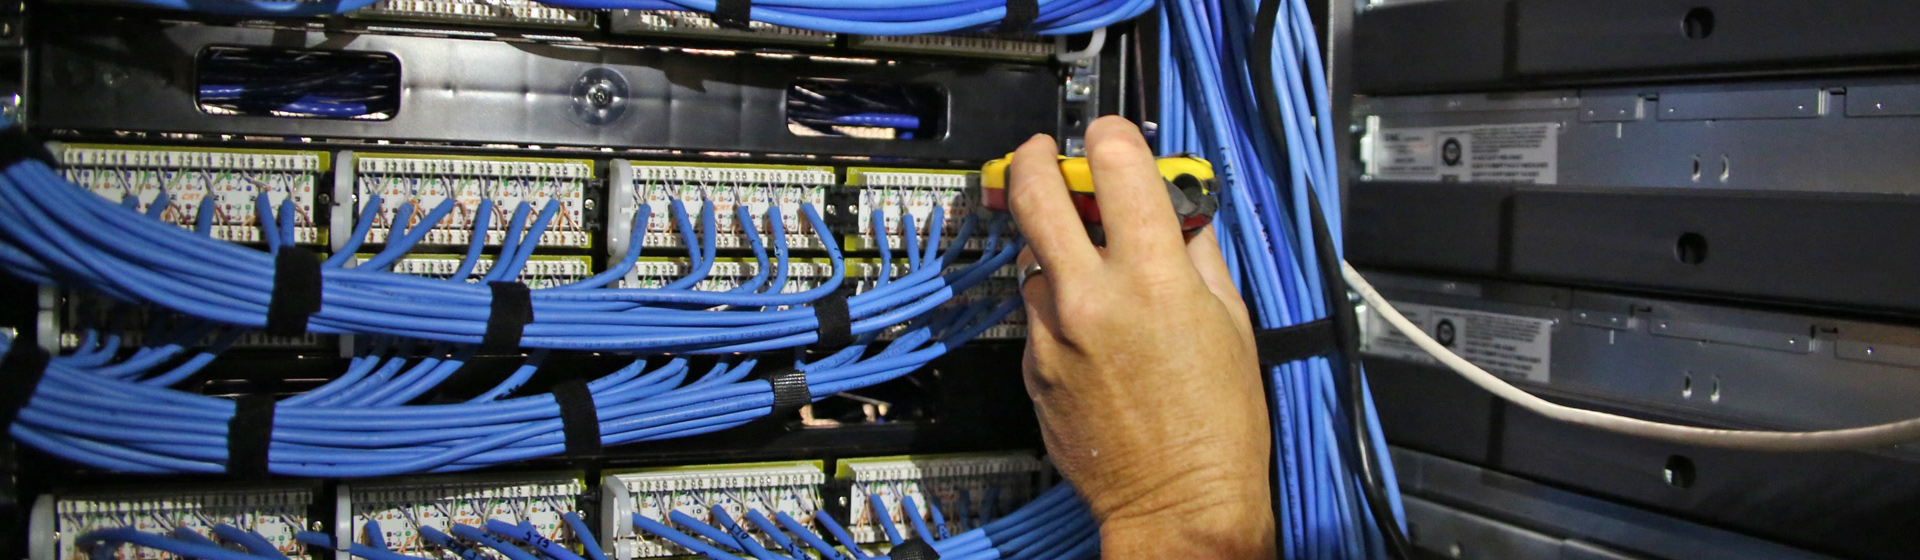 Network Cabling Company | Tampa Bay | High Definition Audio Video, Inc.